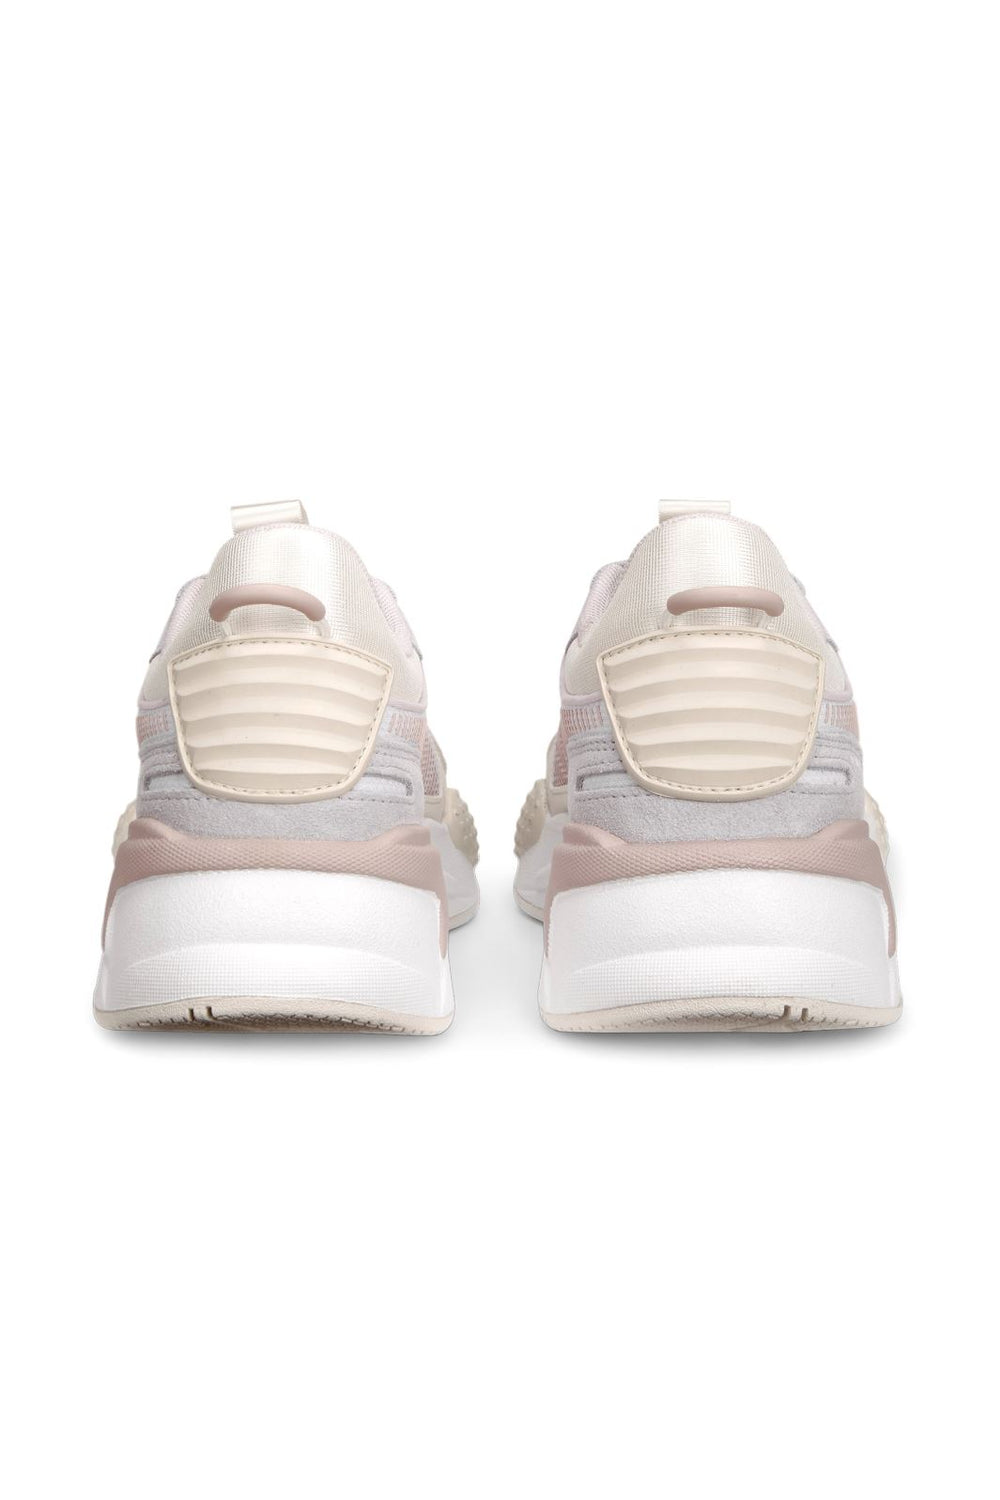 Puma - RS-X Candy Wns - White 1 Sneakers 